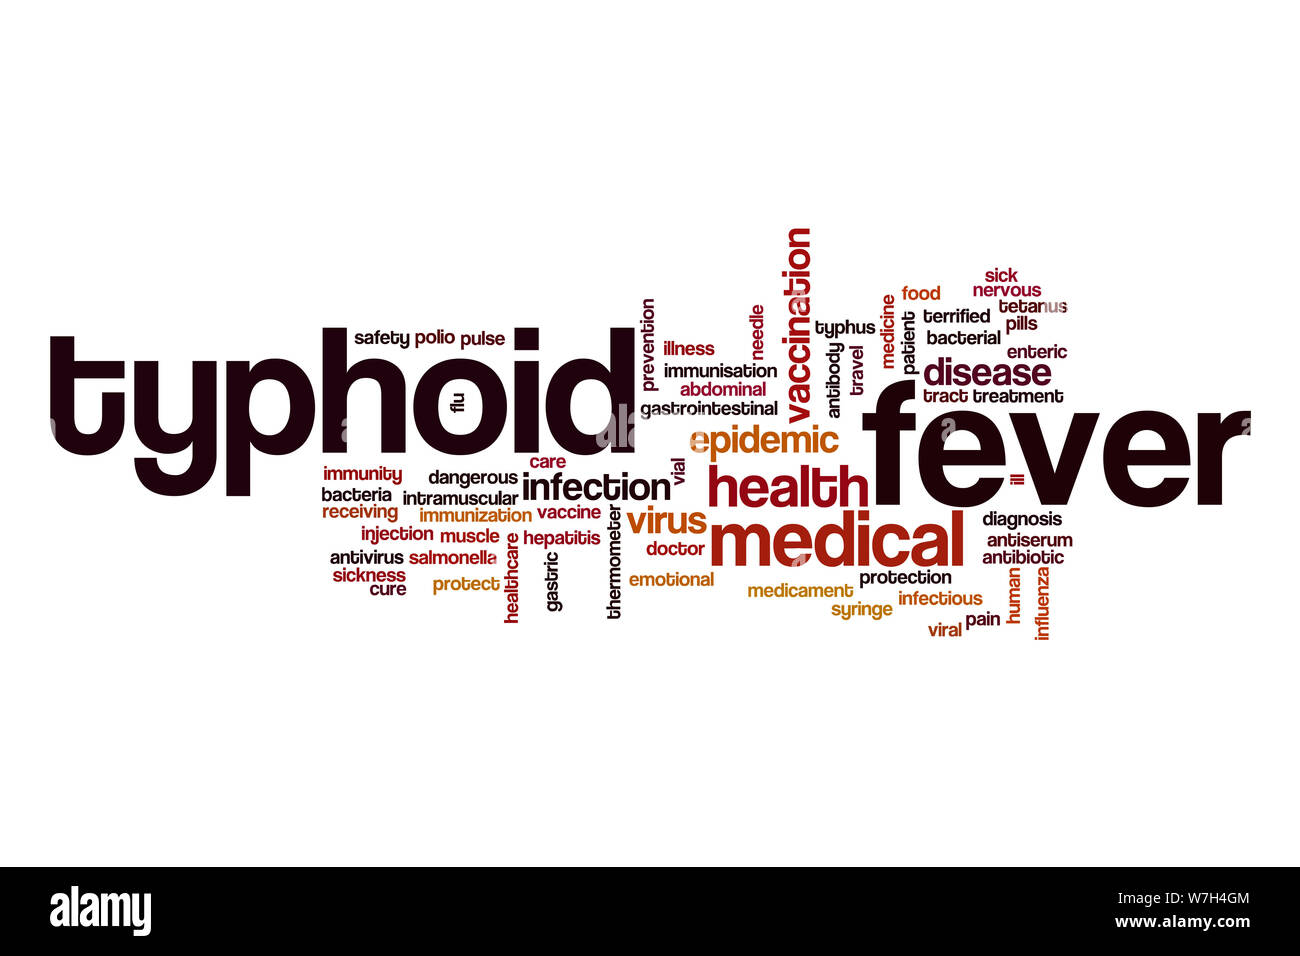 Typhoid fever word cloud Stock Photo